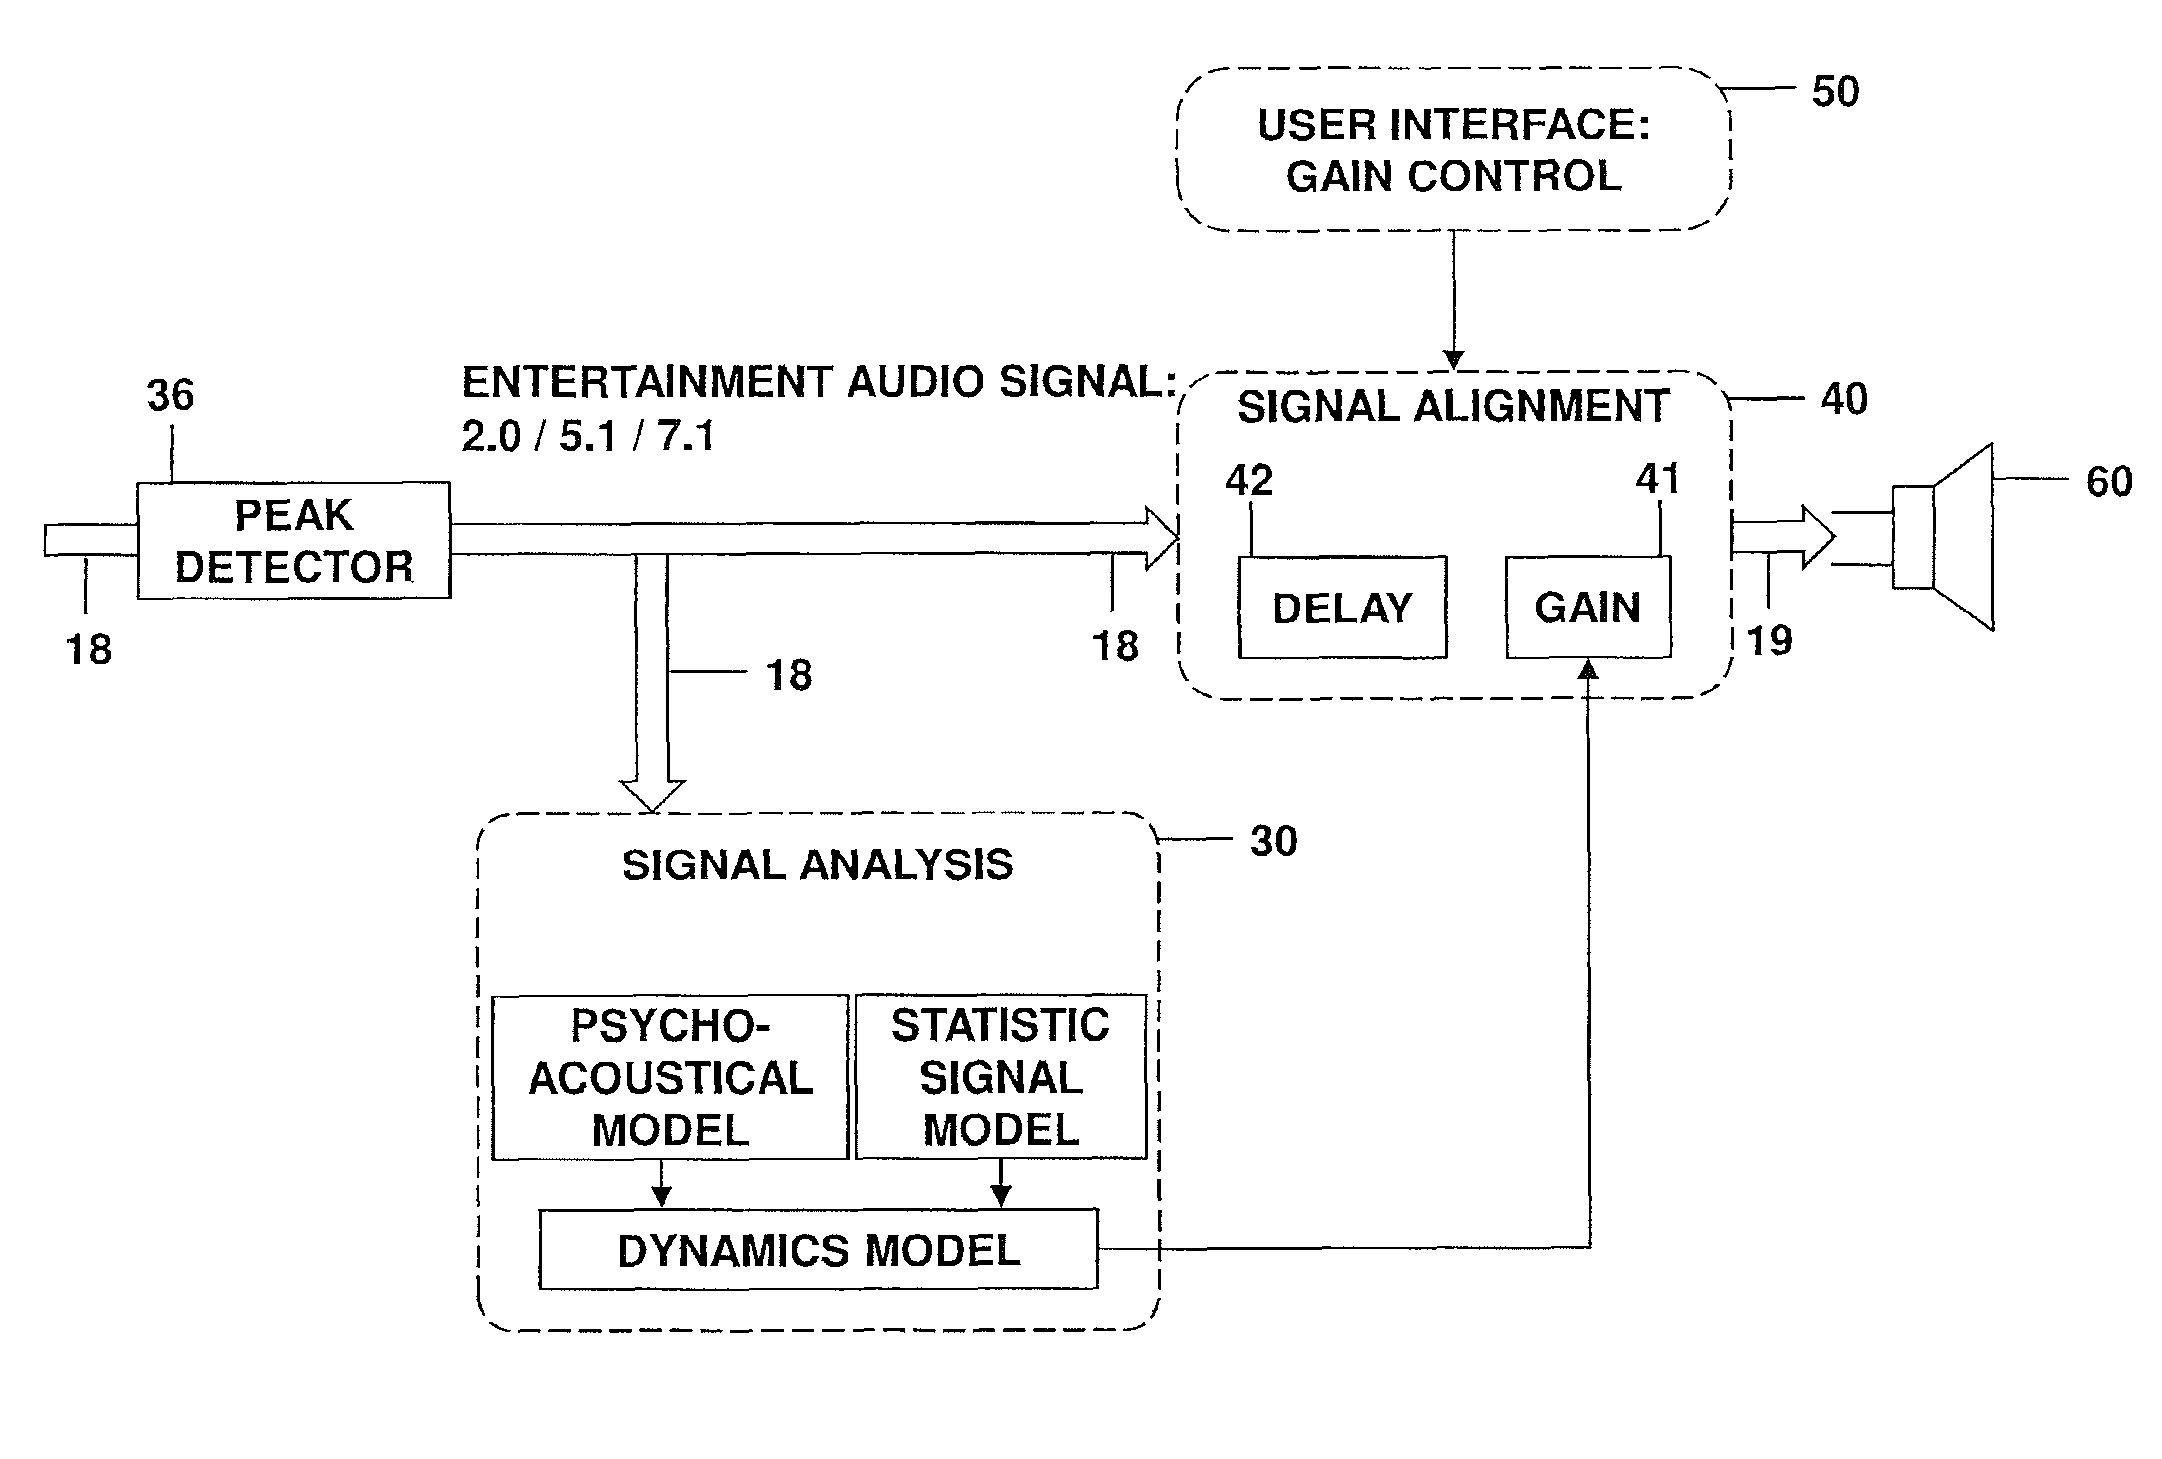 Peak detection when adapting a signal gain based on signal loudness